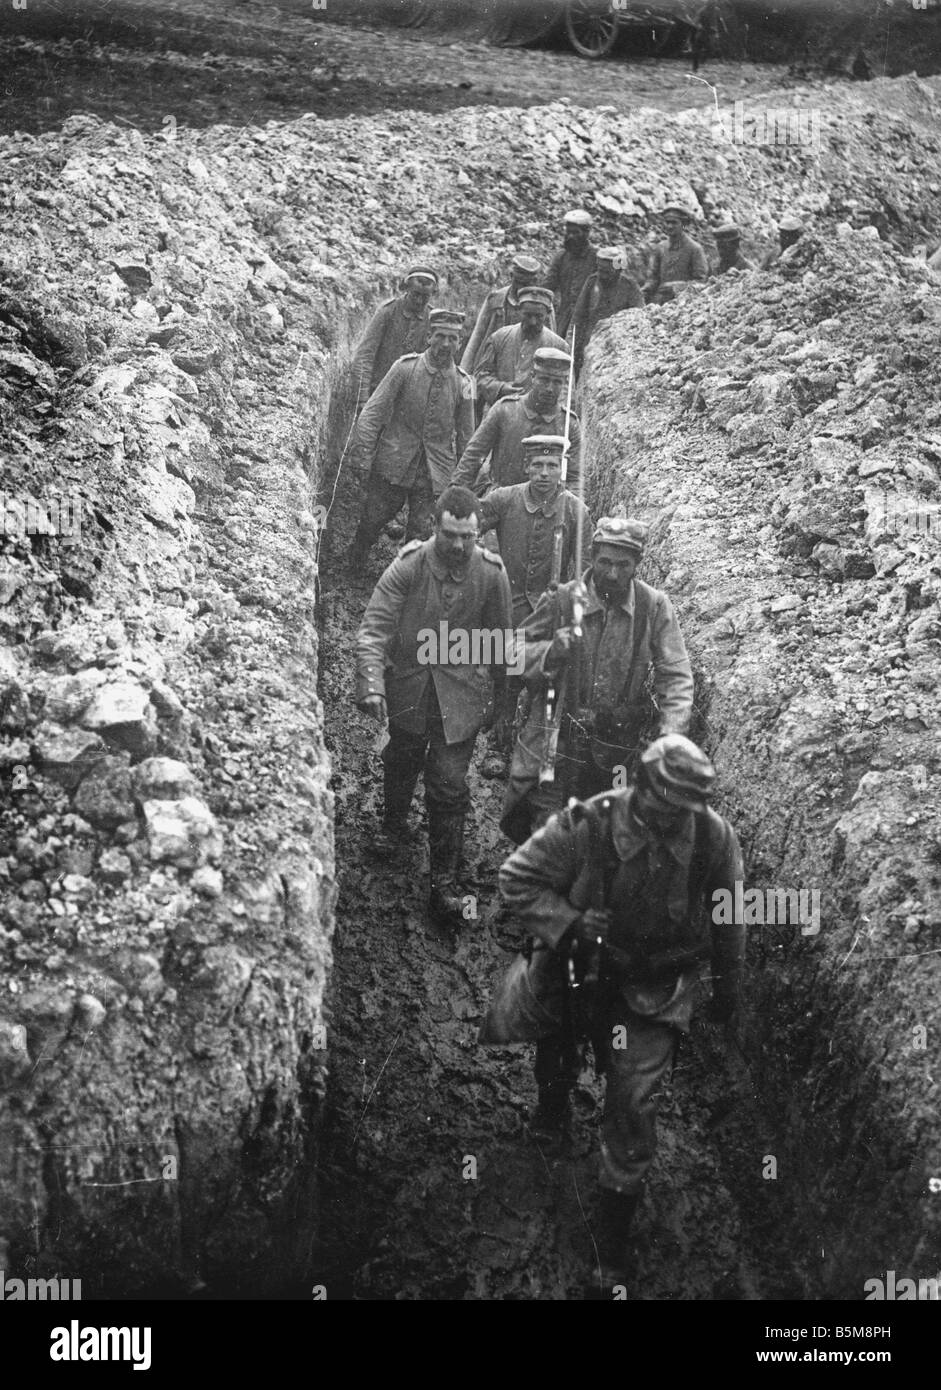 2 G55 K1 1915 14 German POWs in Champagne WWI 1915 History World War I Prisoners of war Captured German soldiers in trenches nea Stock Photo